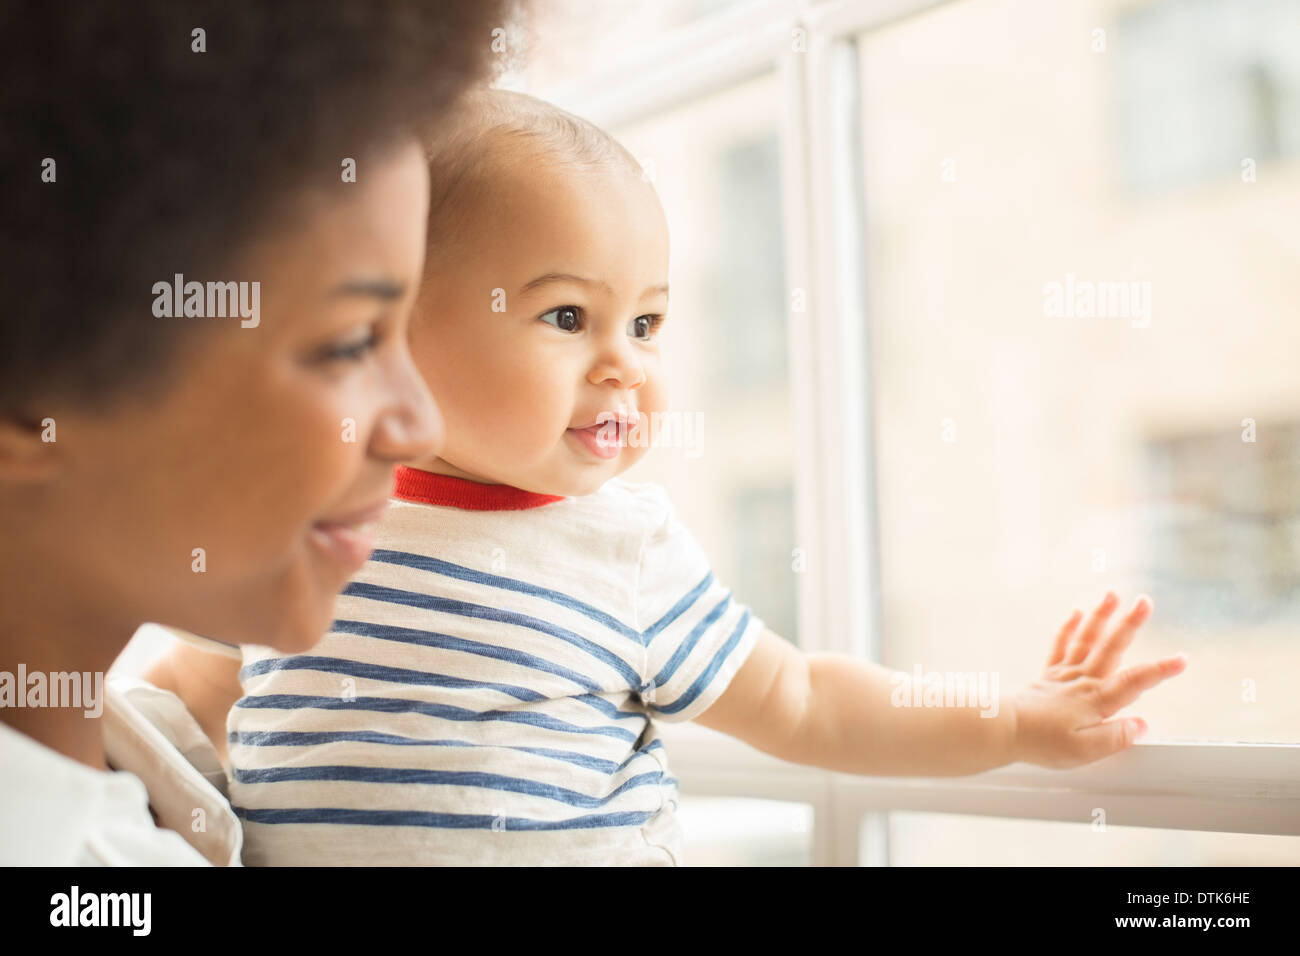 Mother and baby boy looking out window Stock Photo